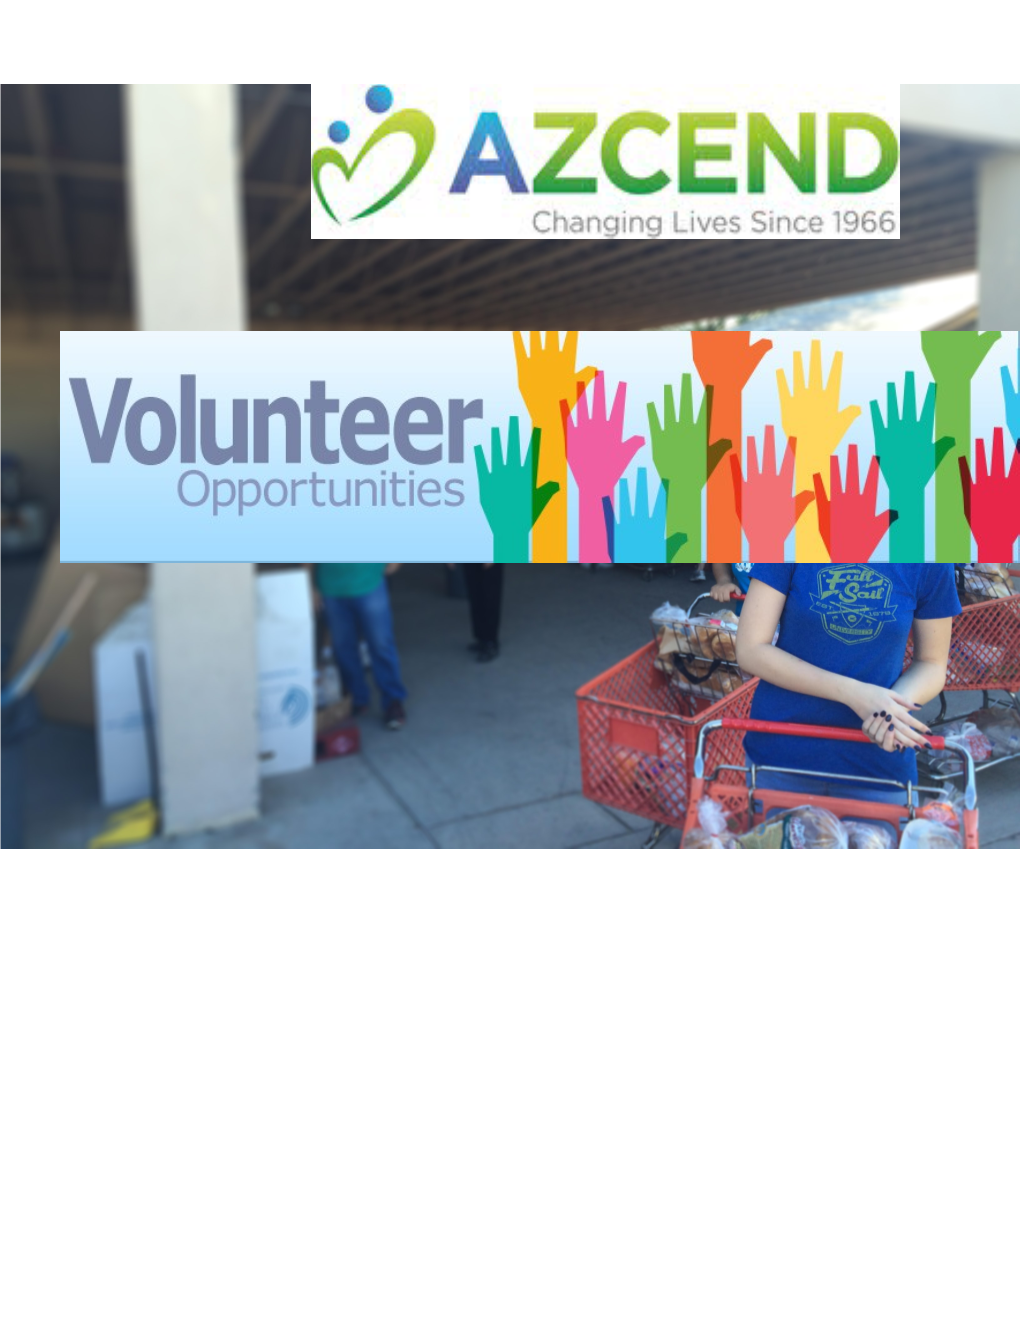 Volunteers Are Crucial to the Work of AZCEND